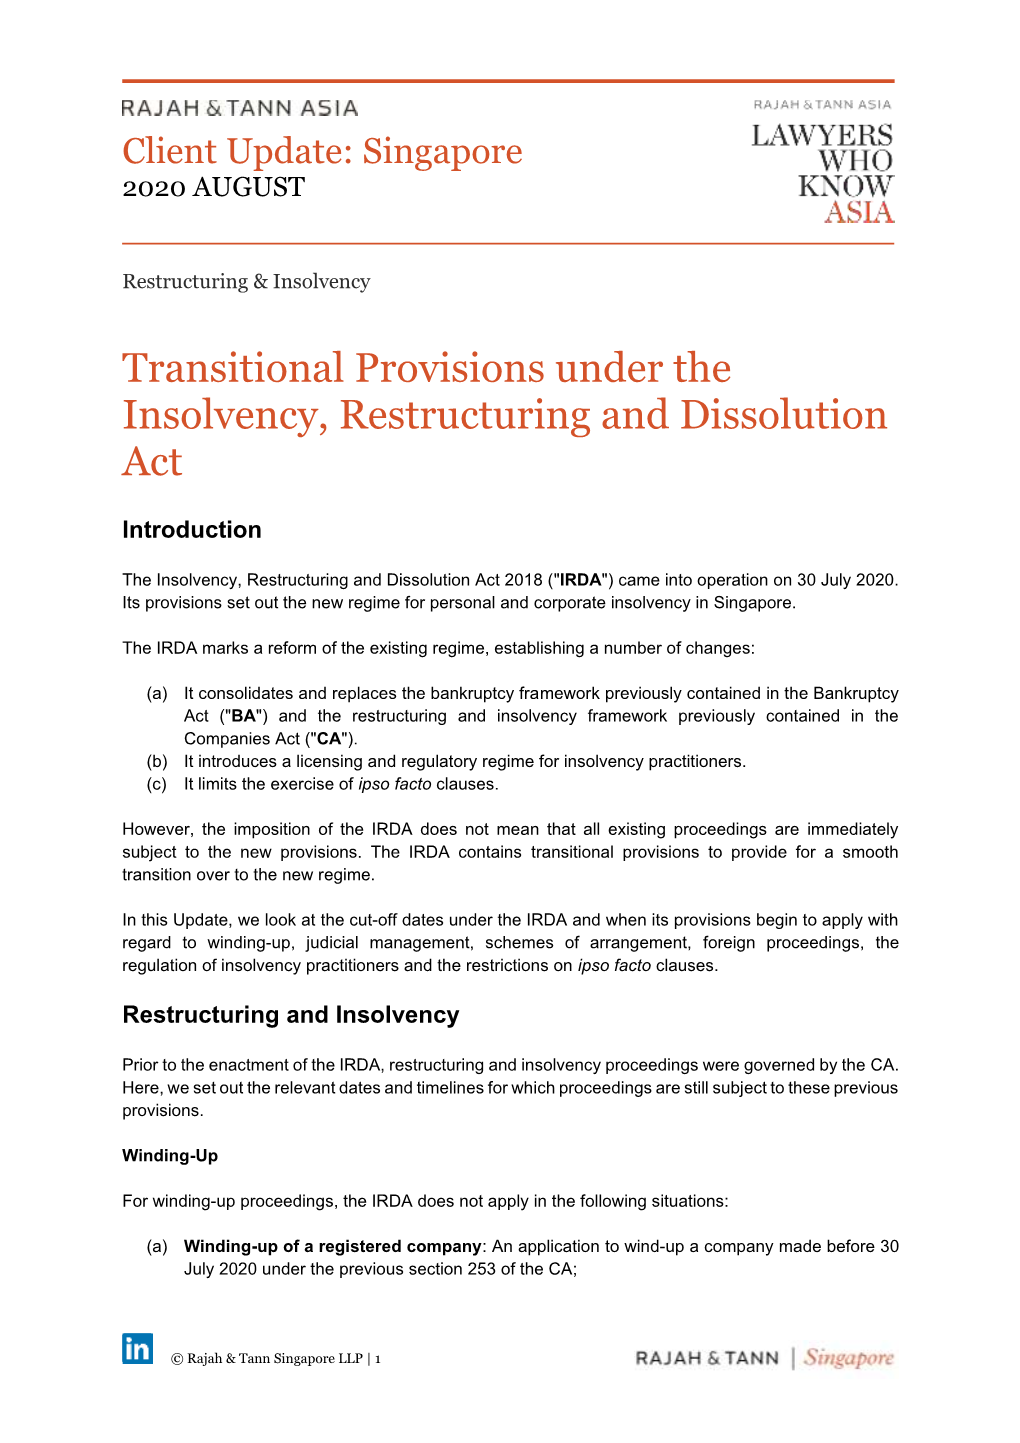 Transitional Provisions Under the Insolvency, Restructuring and Dissolution Act